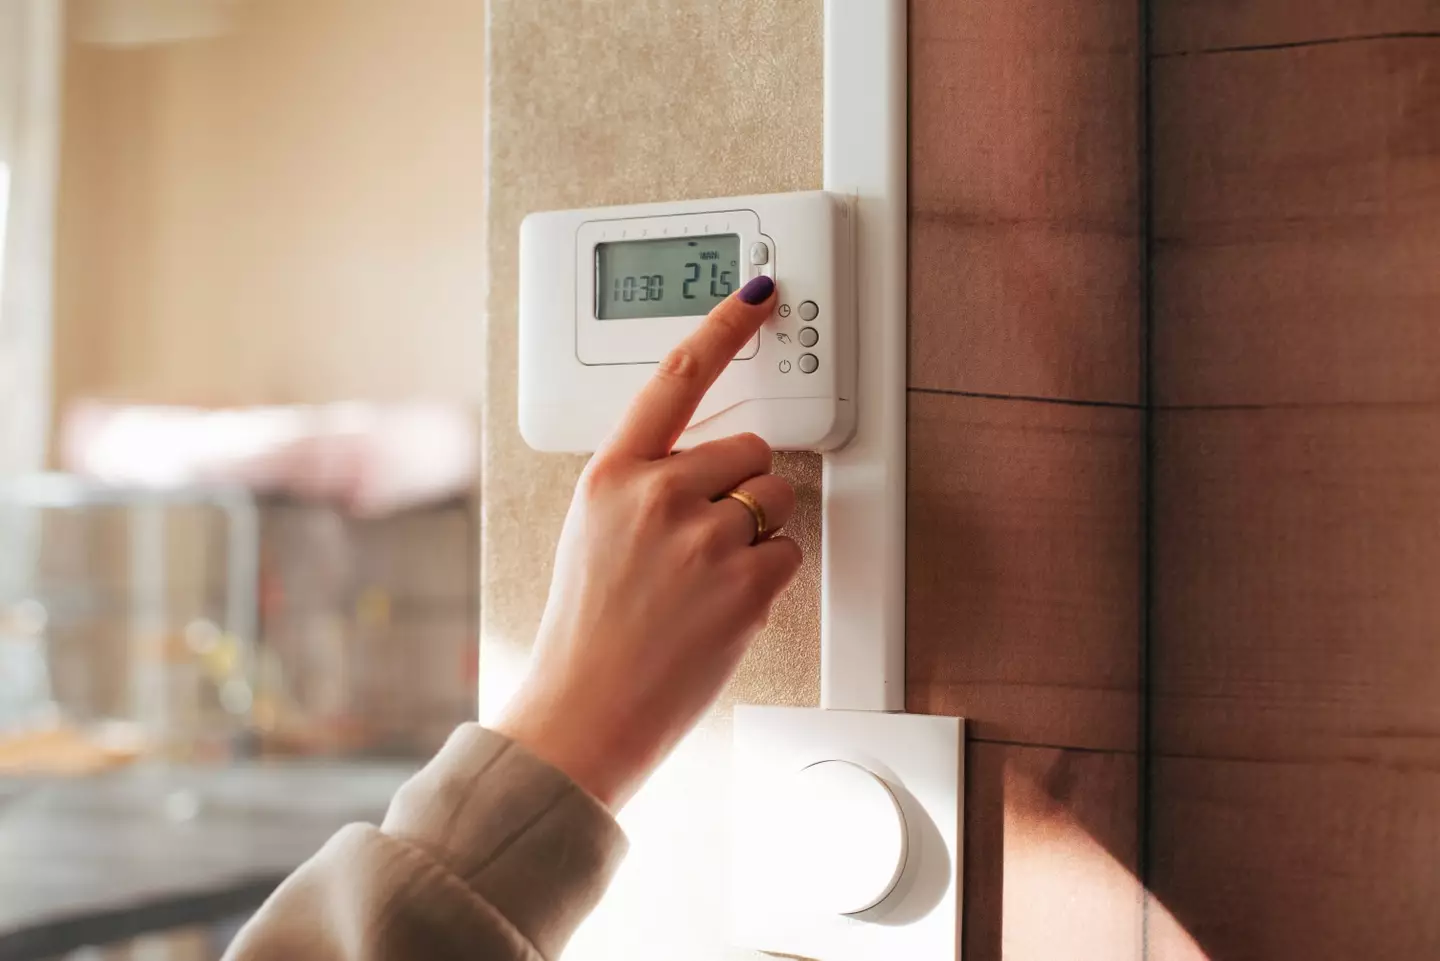 People have been extra careful at how high they set their thermostats.